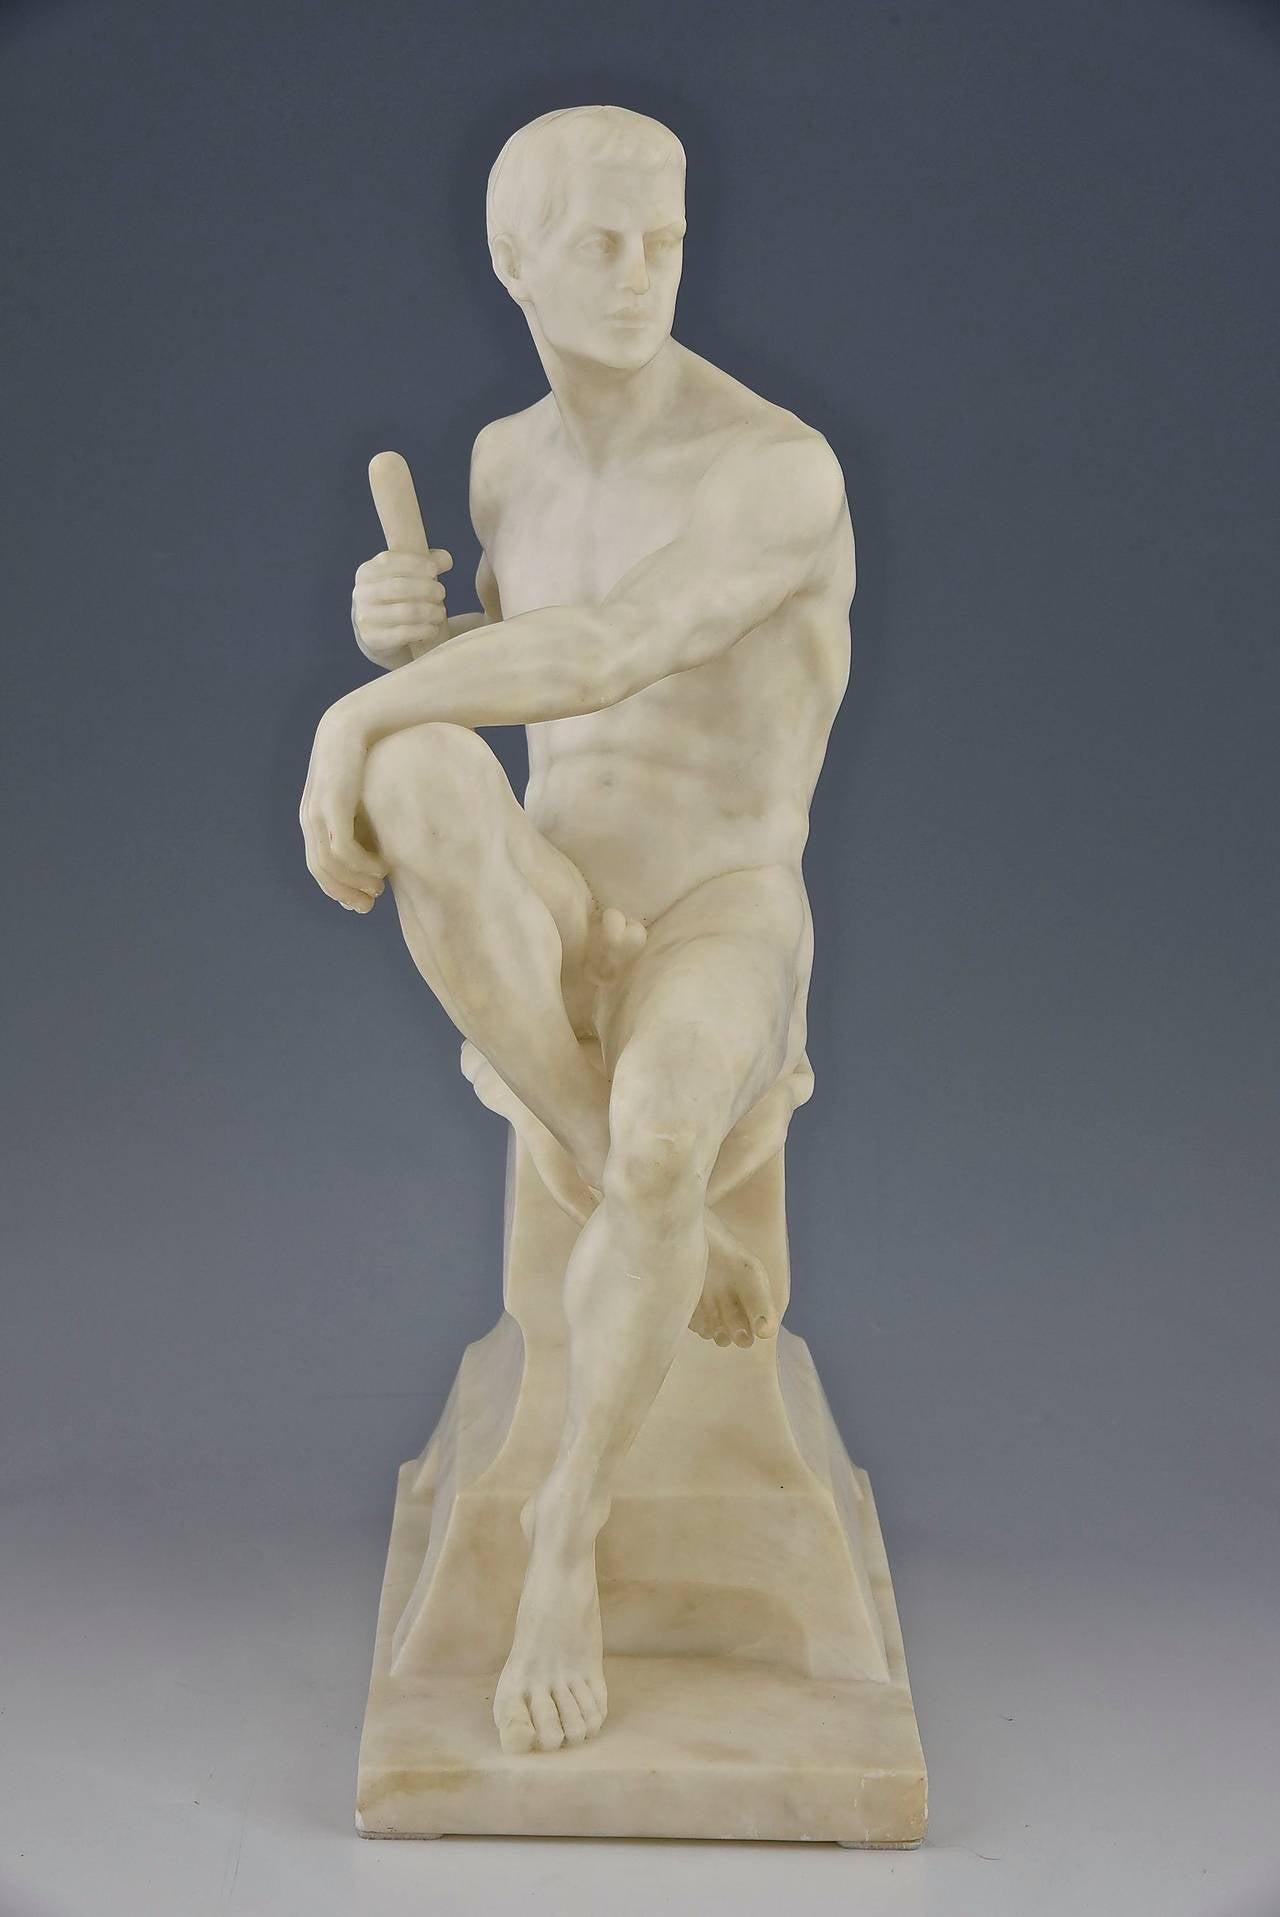 Carved Antique Marble Sculpture of a Male Nude by Franz Iffland, 1890, Germany